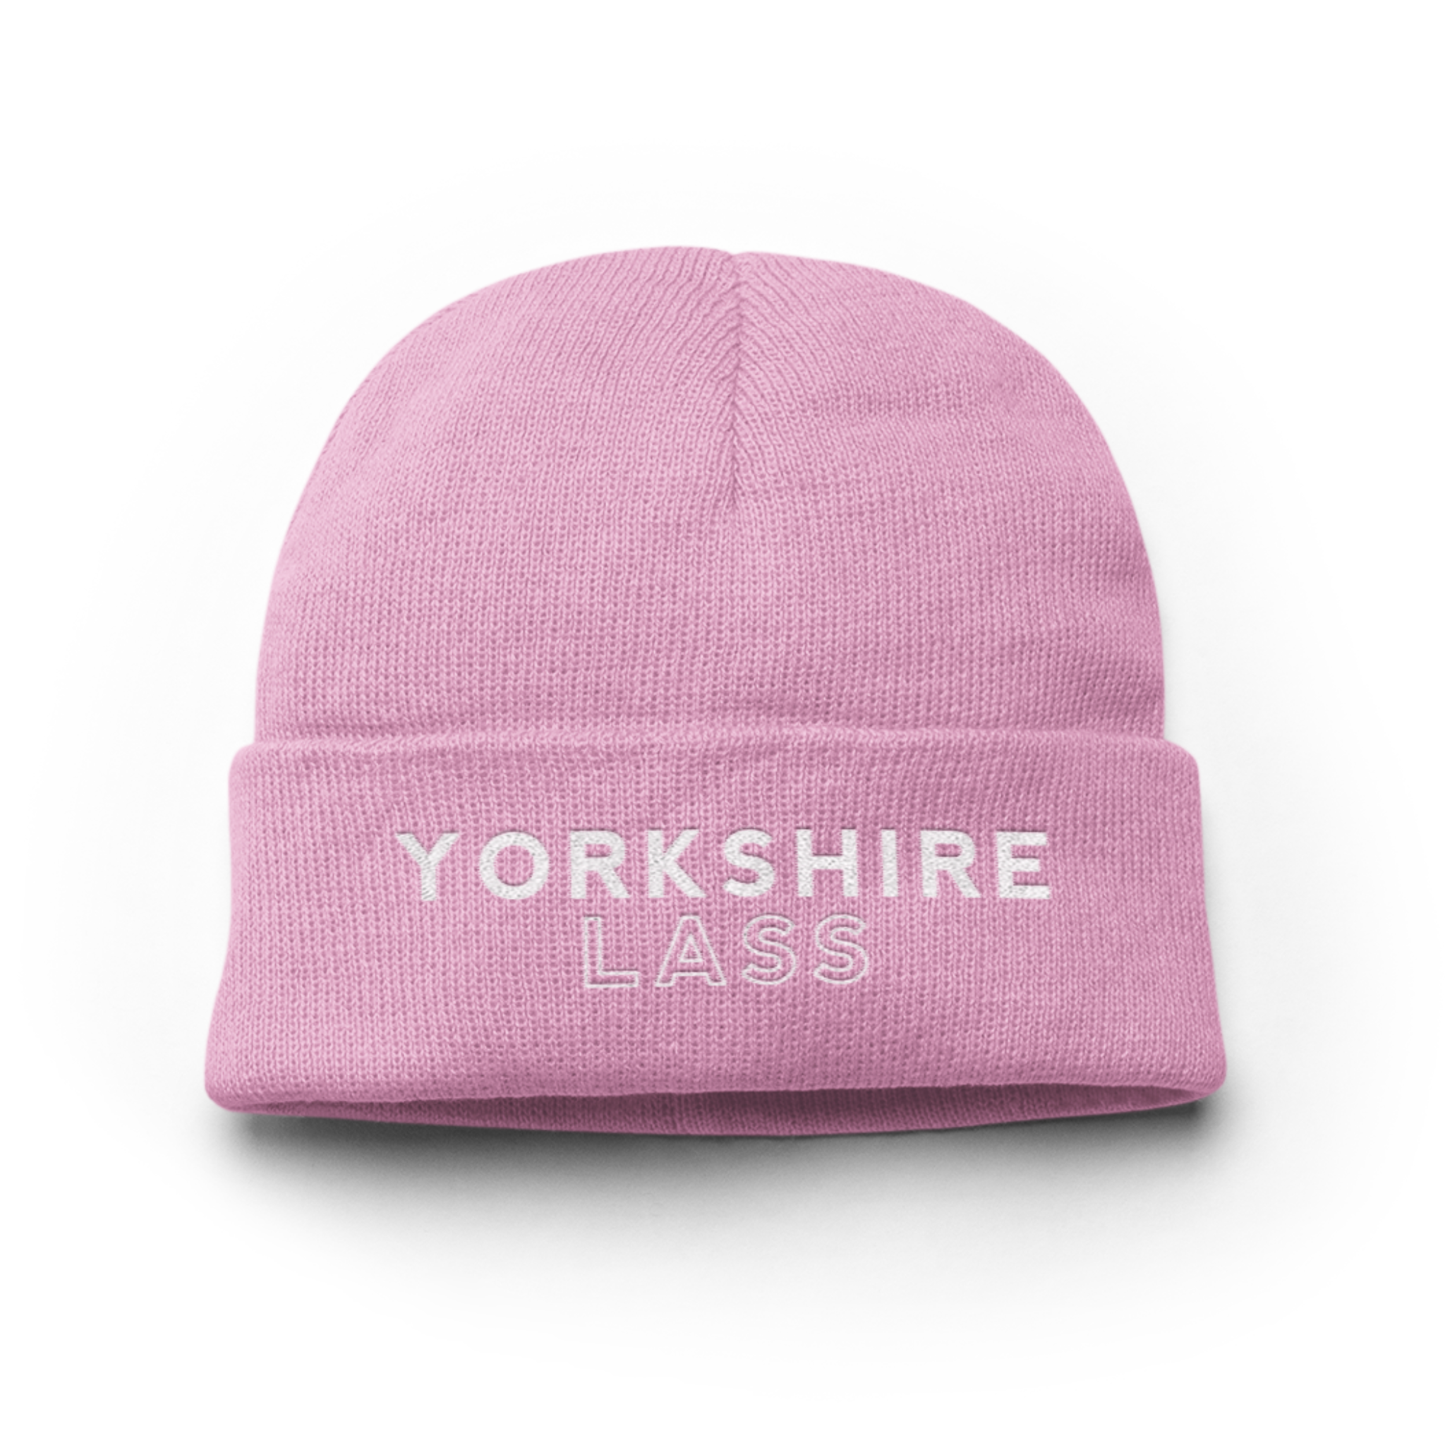 Yorkshire Lass Beanie Hat - The Great Yorkshire Shop